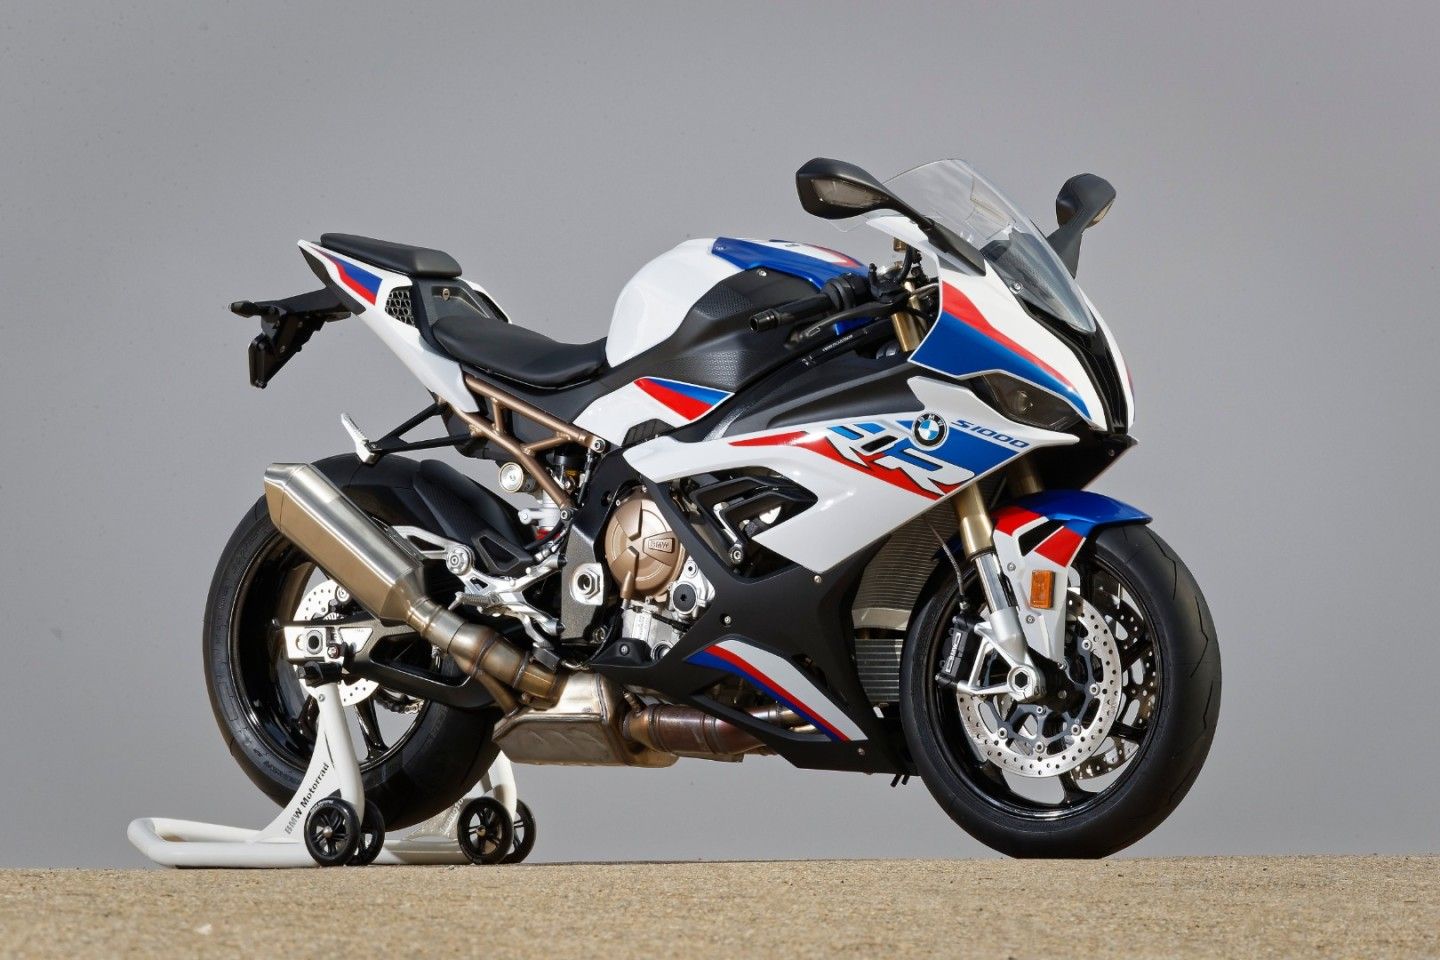 Third Gen 2019 BMW S1000RR Gains 8 Hp, Loses 24 Lb, And Gets